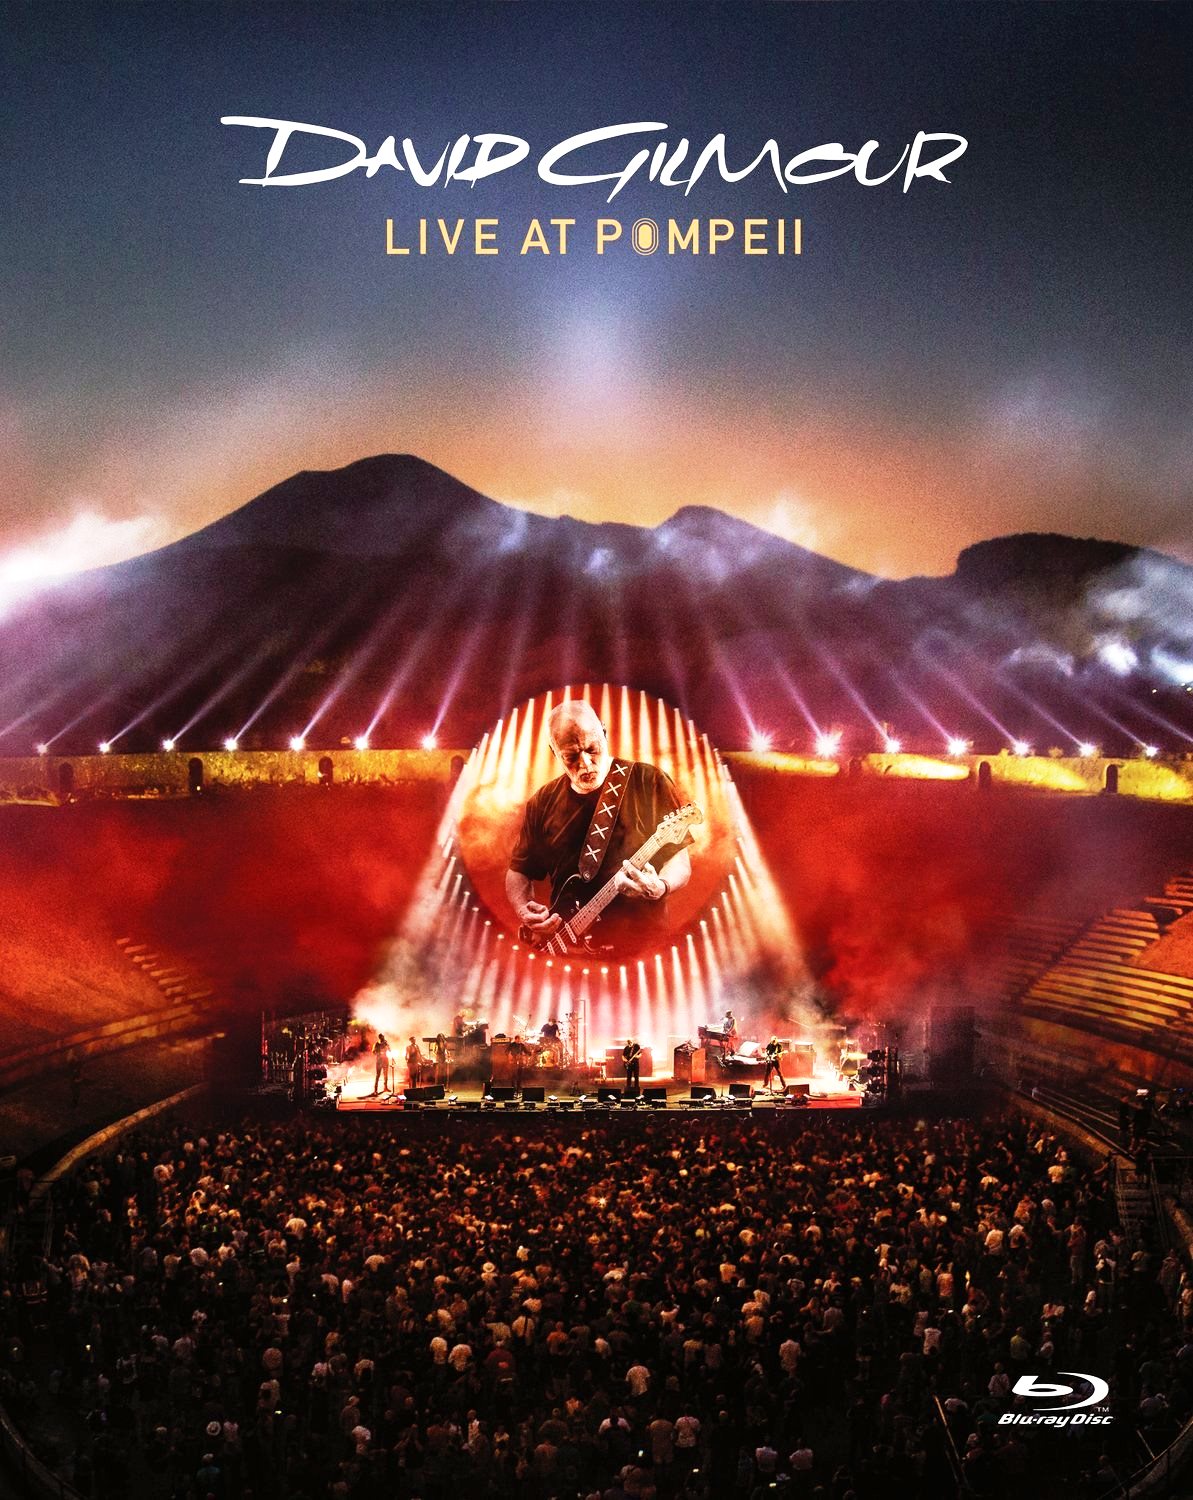 Gilmour, David - Live at Pompeii - blu-ray cover